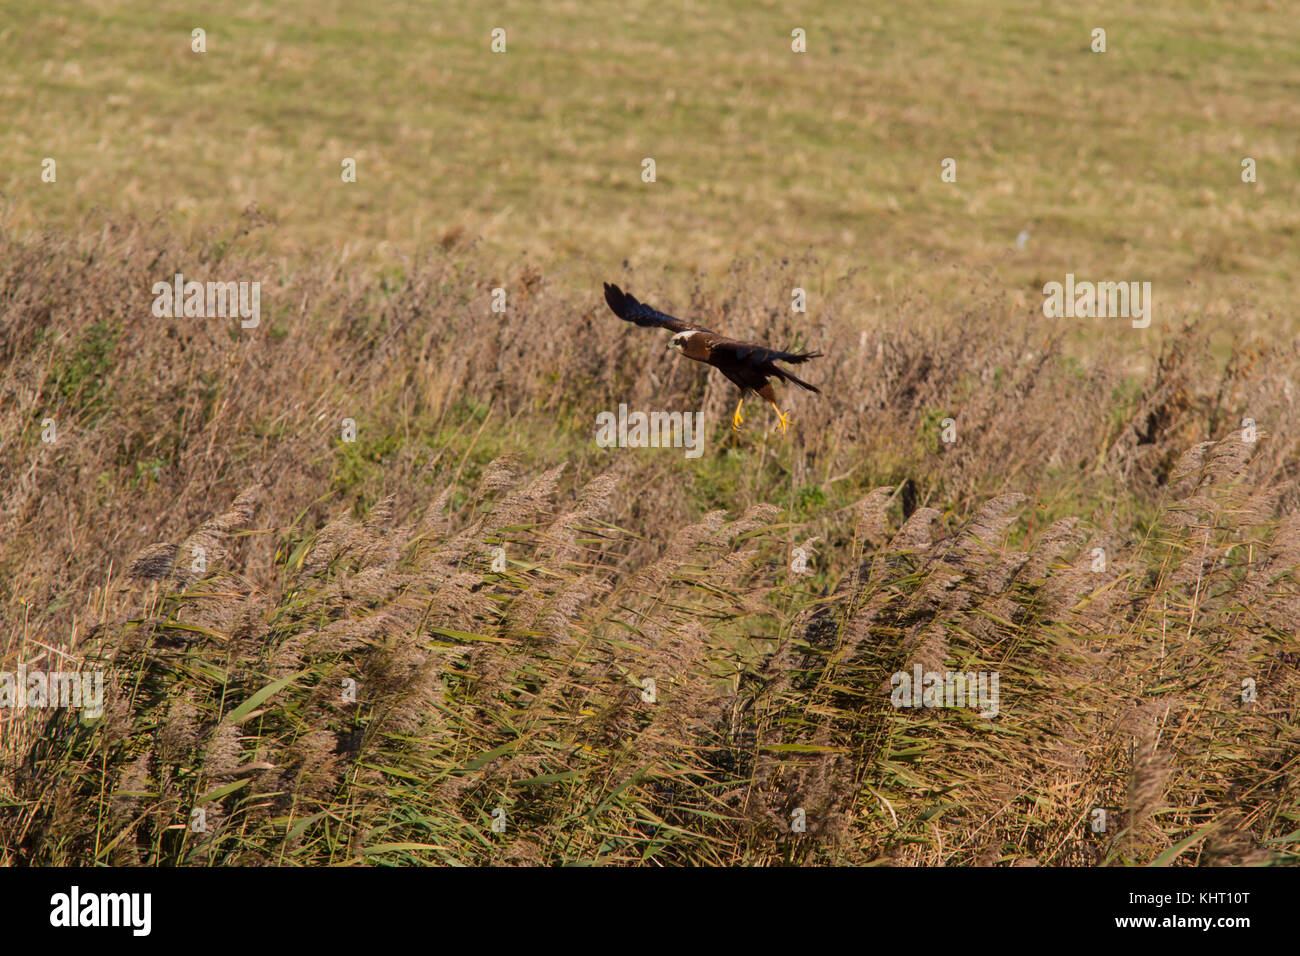 A Western Marsh Harrier (Circus aeruginosus) also known as Eurasian Marsh Harrier or just Marsh Harrier hunting prey over a reed bed. Stock Photo